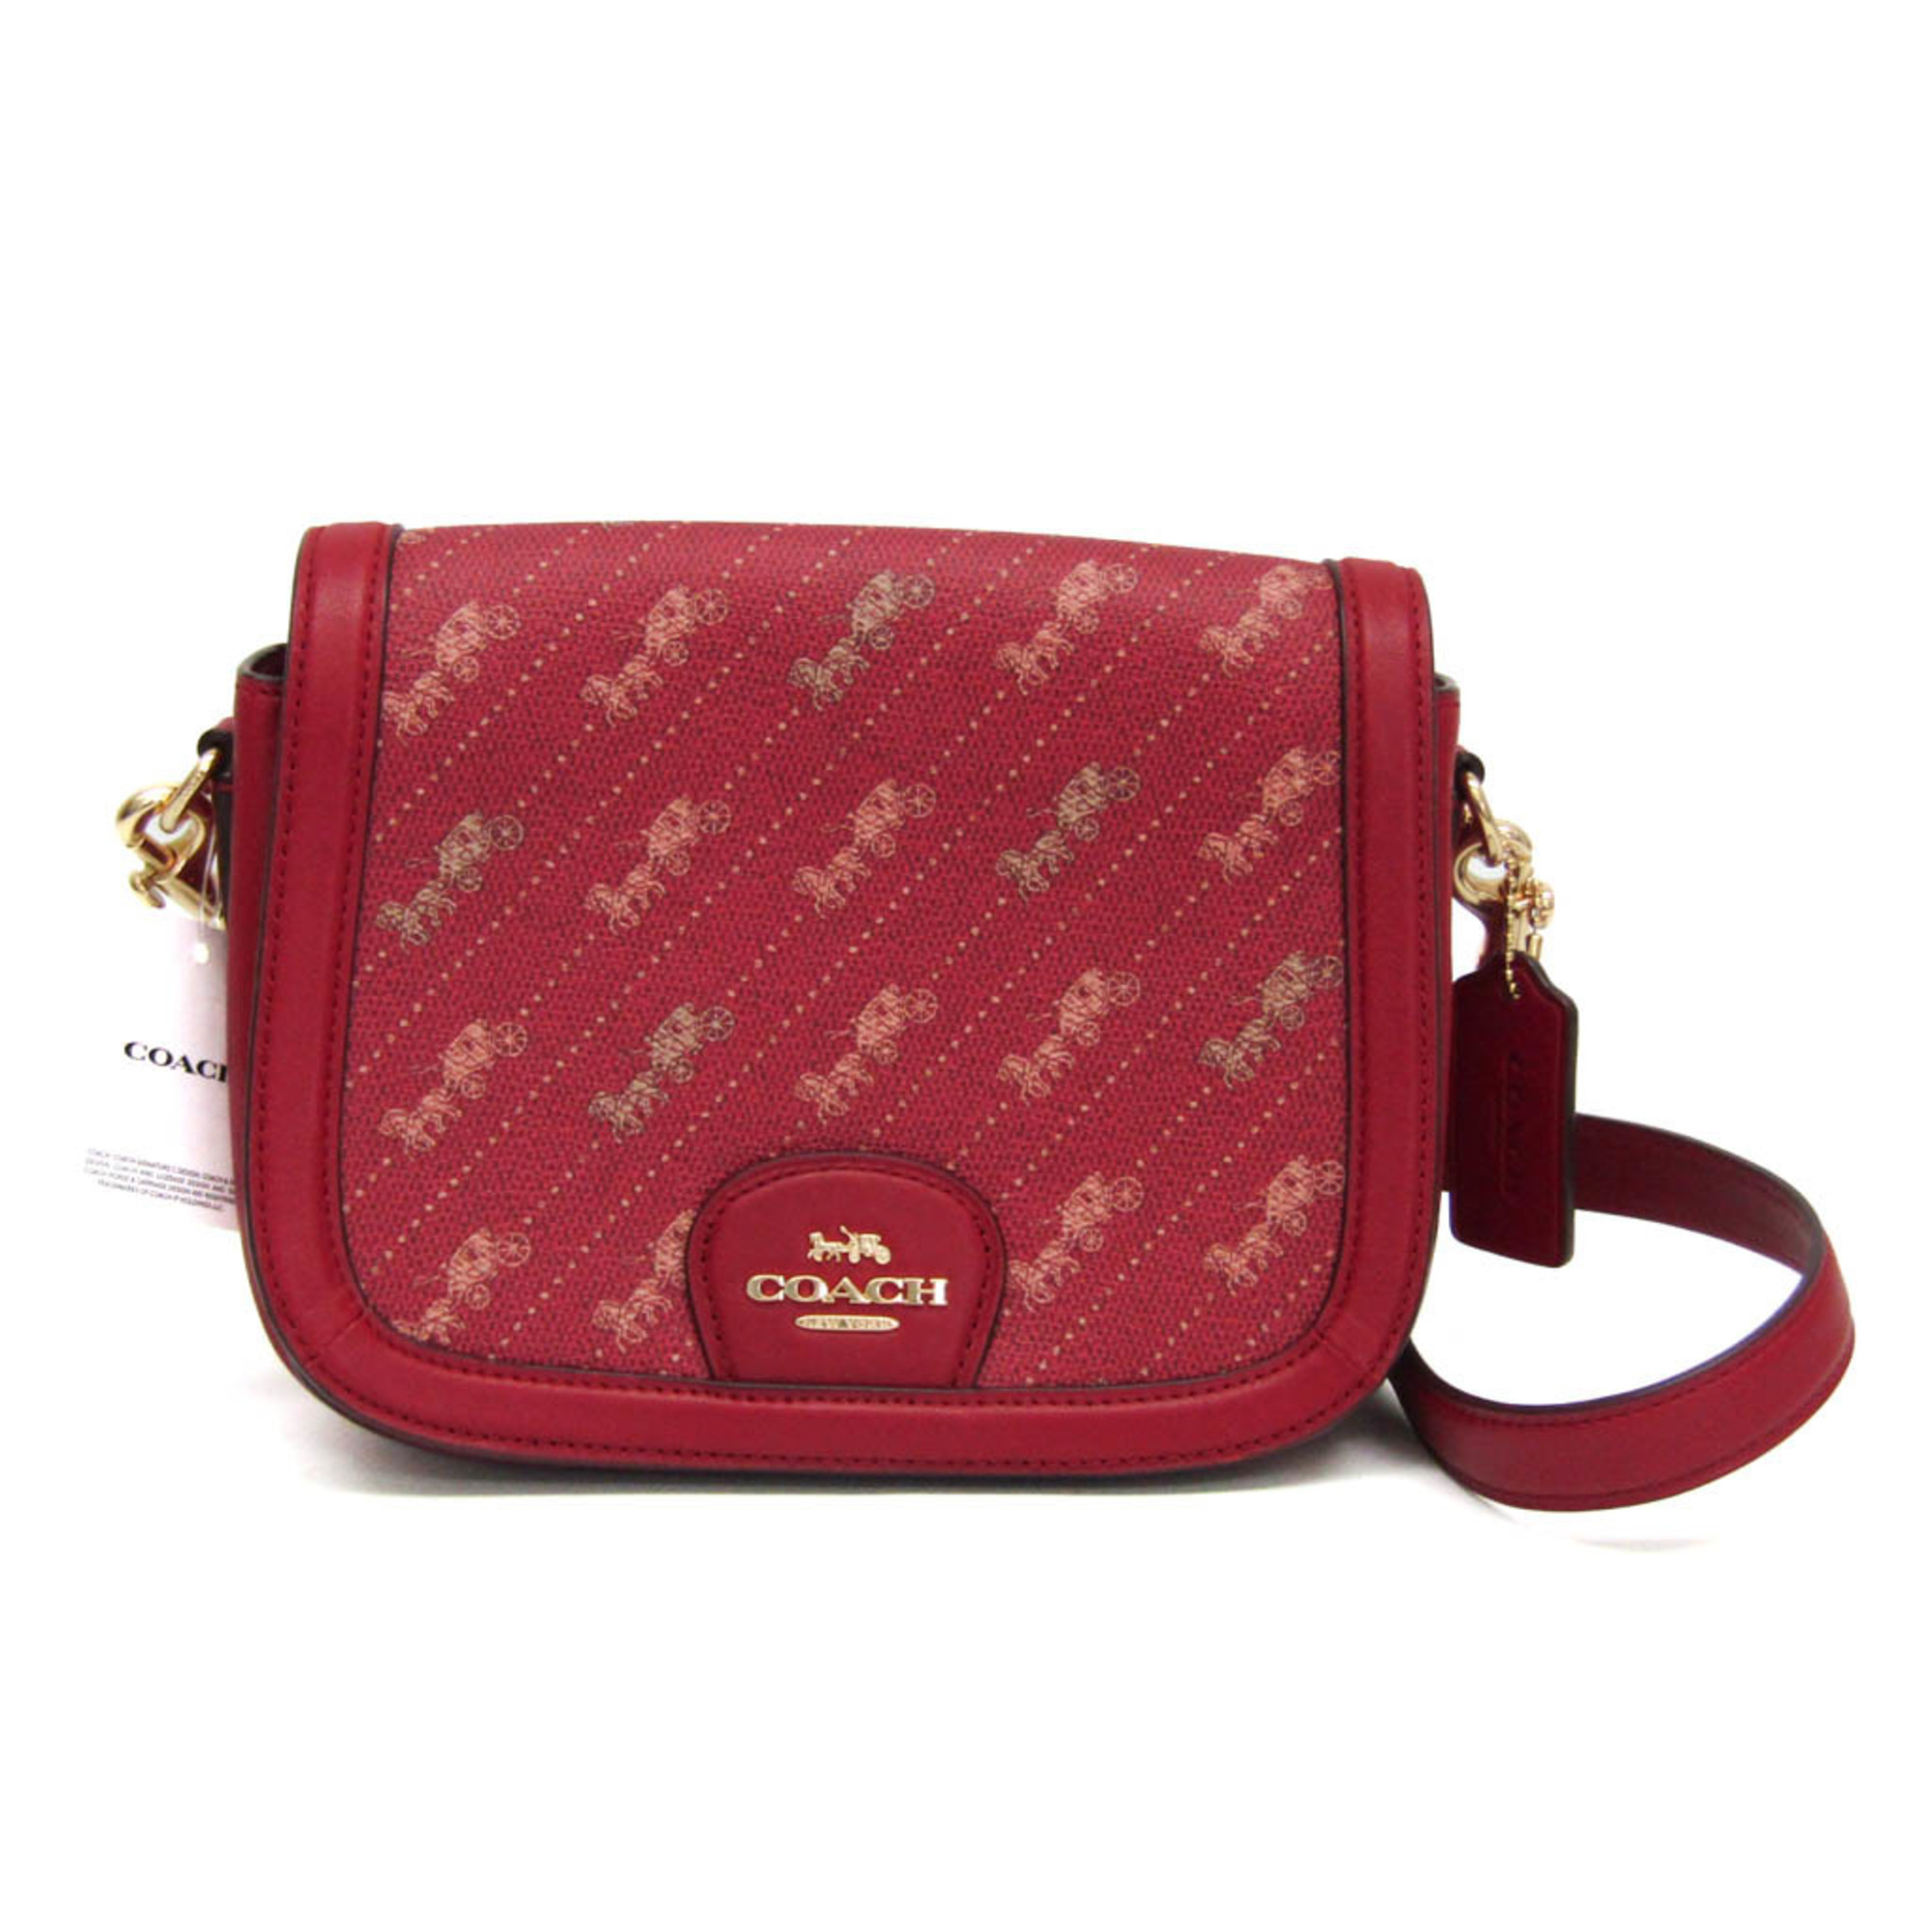 Coach Horse And Carriage Print C4059 Men's Leather,PVC Shoulder Bag Pink,Red Color